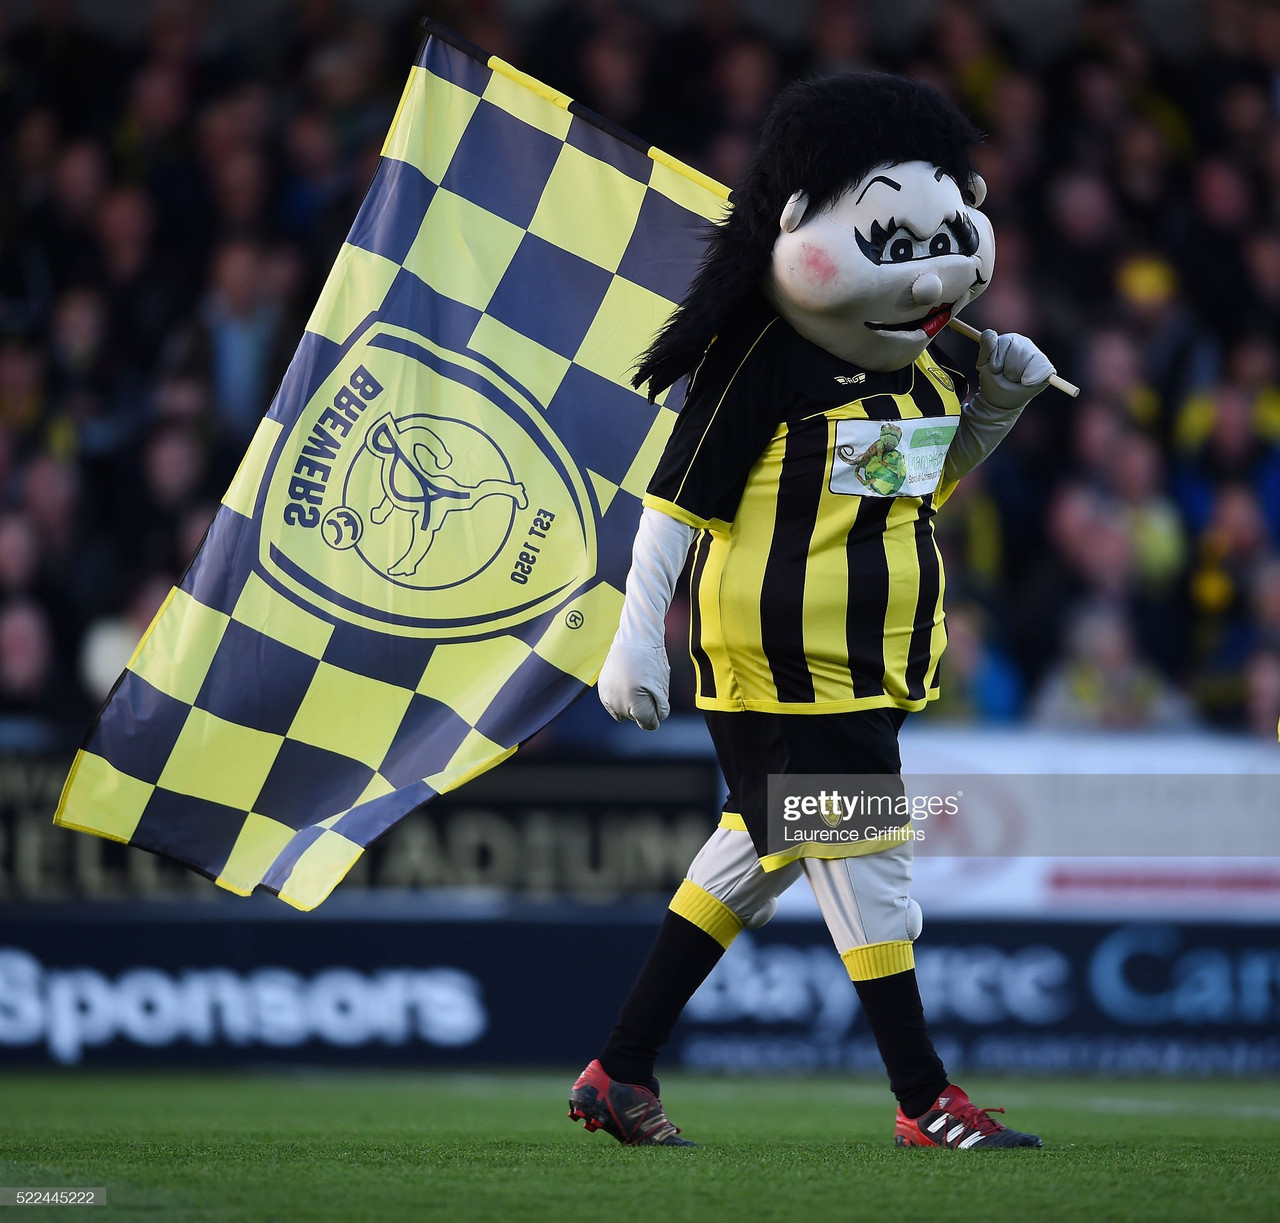 Burton Albion vs Wigan Athletic preview: How to watch, kick-off time, team news, predicted lineups and ones to watch